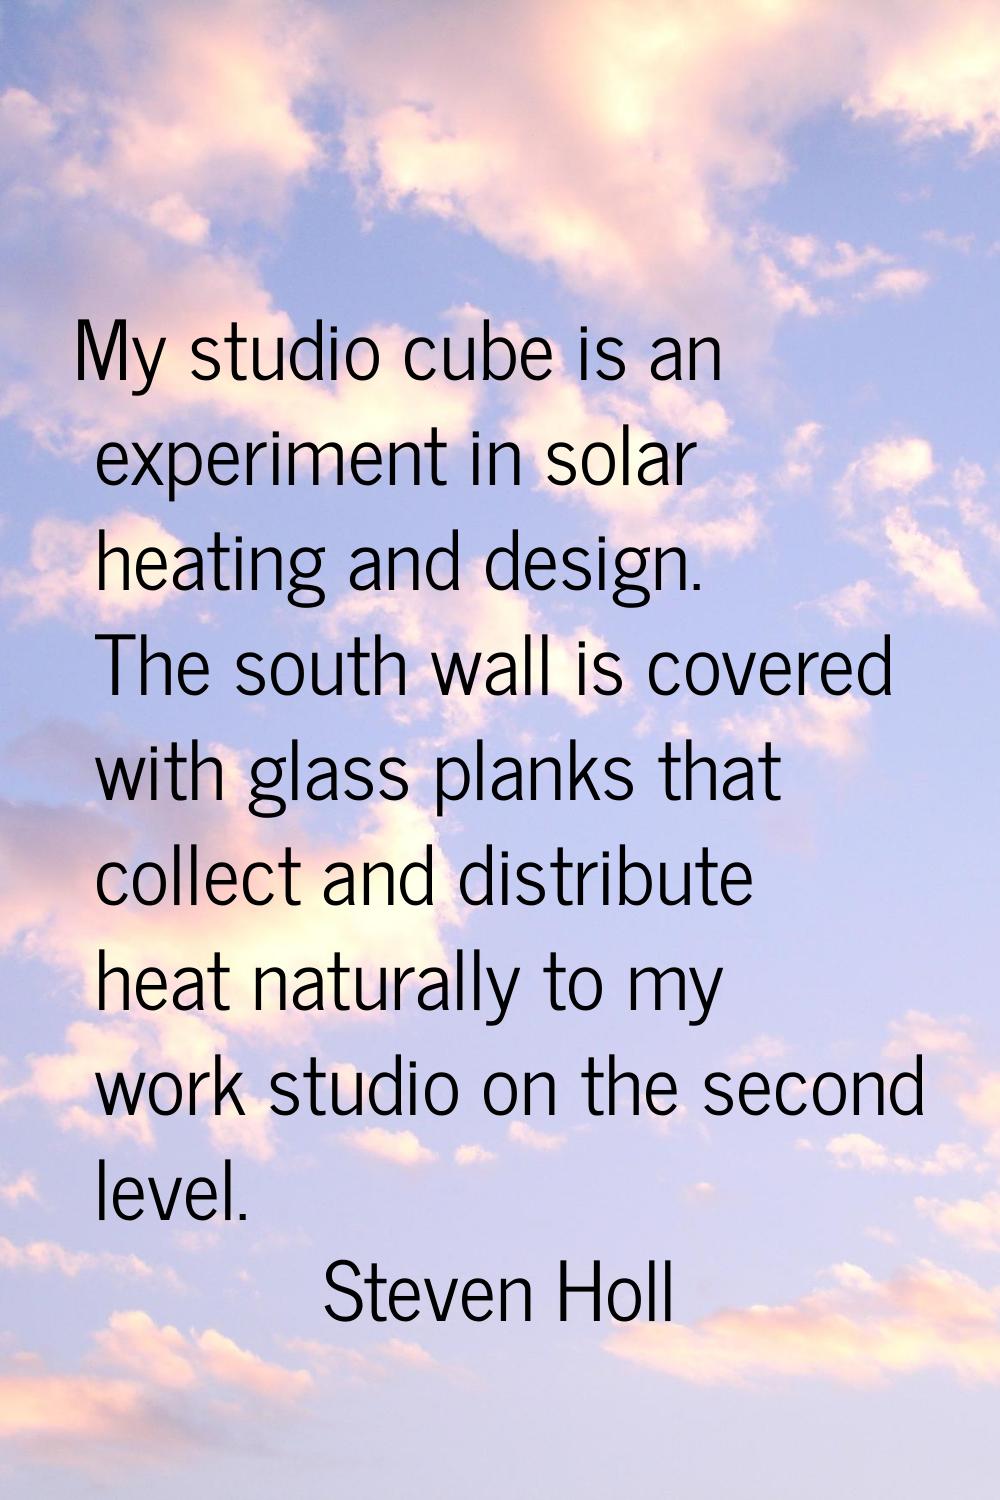 My studio cube is an experiment in solar heating and design. The south wall is covered with glass p